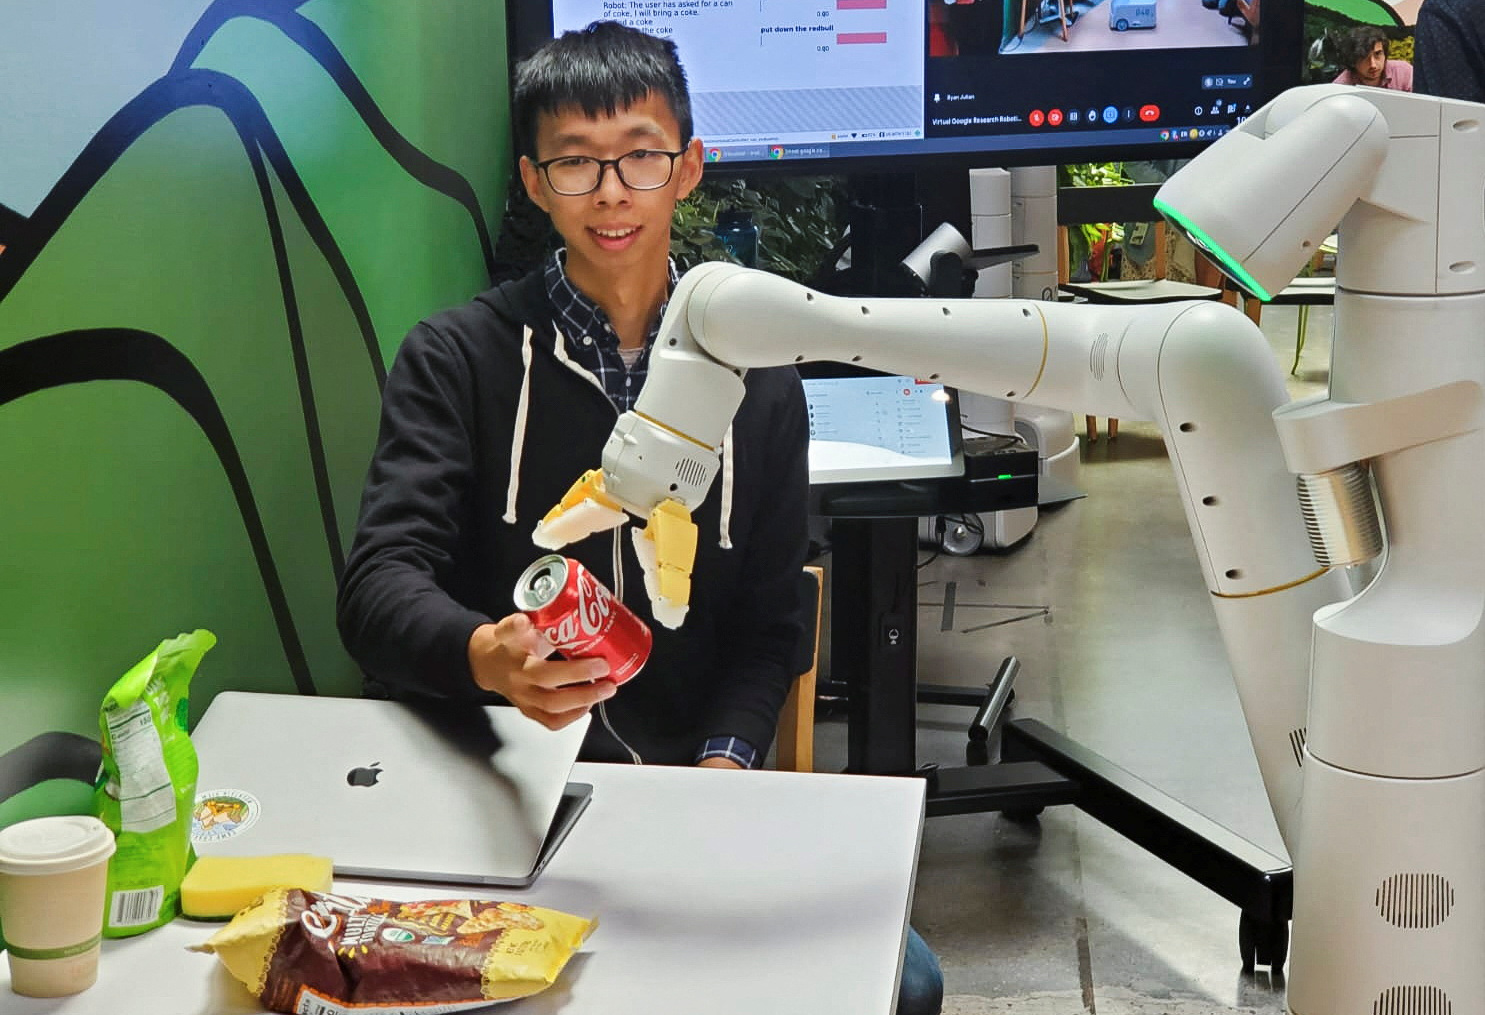 Google research scientist Fei Xia accepts a Coca-Cola can from a robot during a demonstration of AI technology at a company micro-kitchen in Mountain View